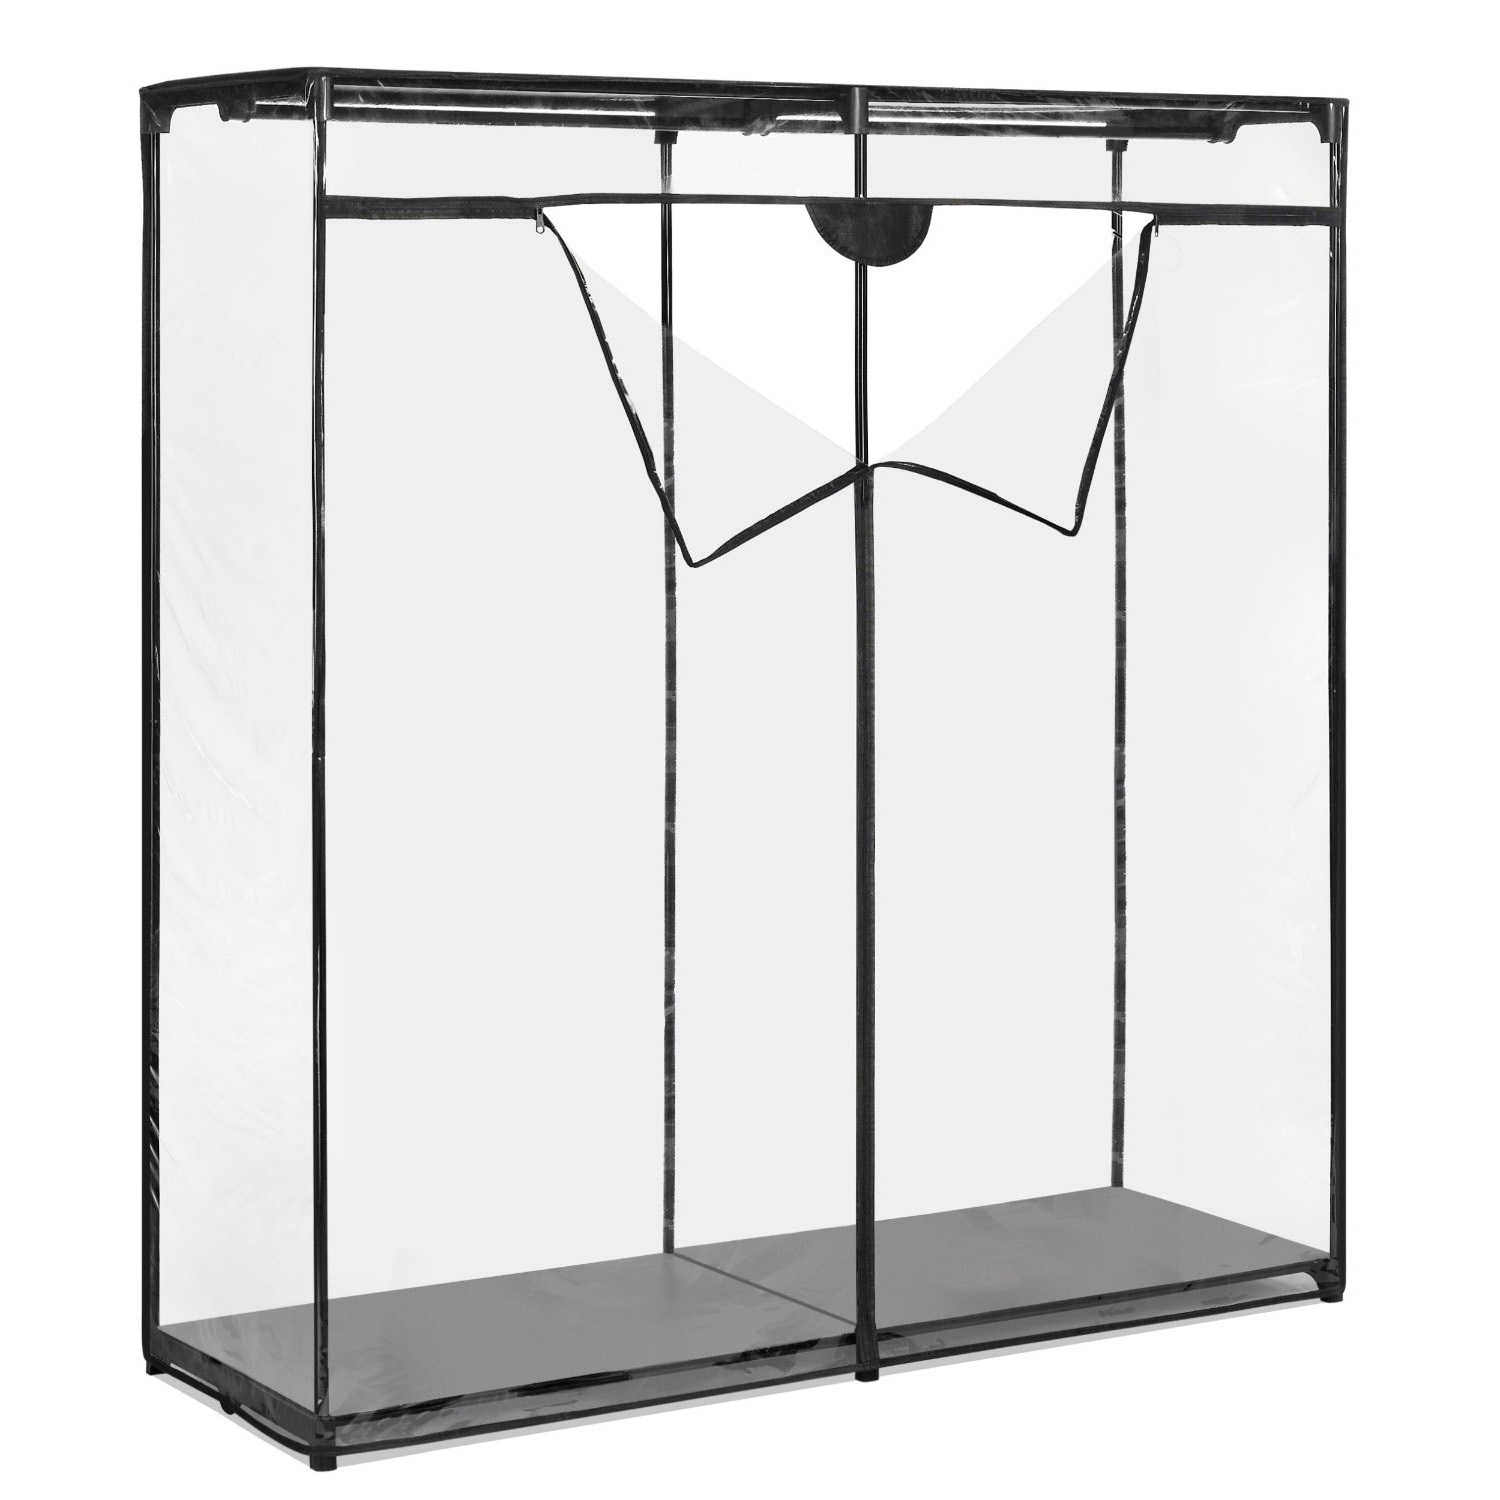 Whitmor Extra Wide 60 inch Metal Freestanding Closet Systems, Black and Clear - image 1 of 5